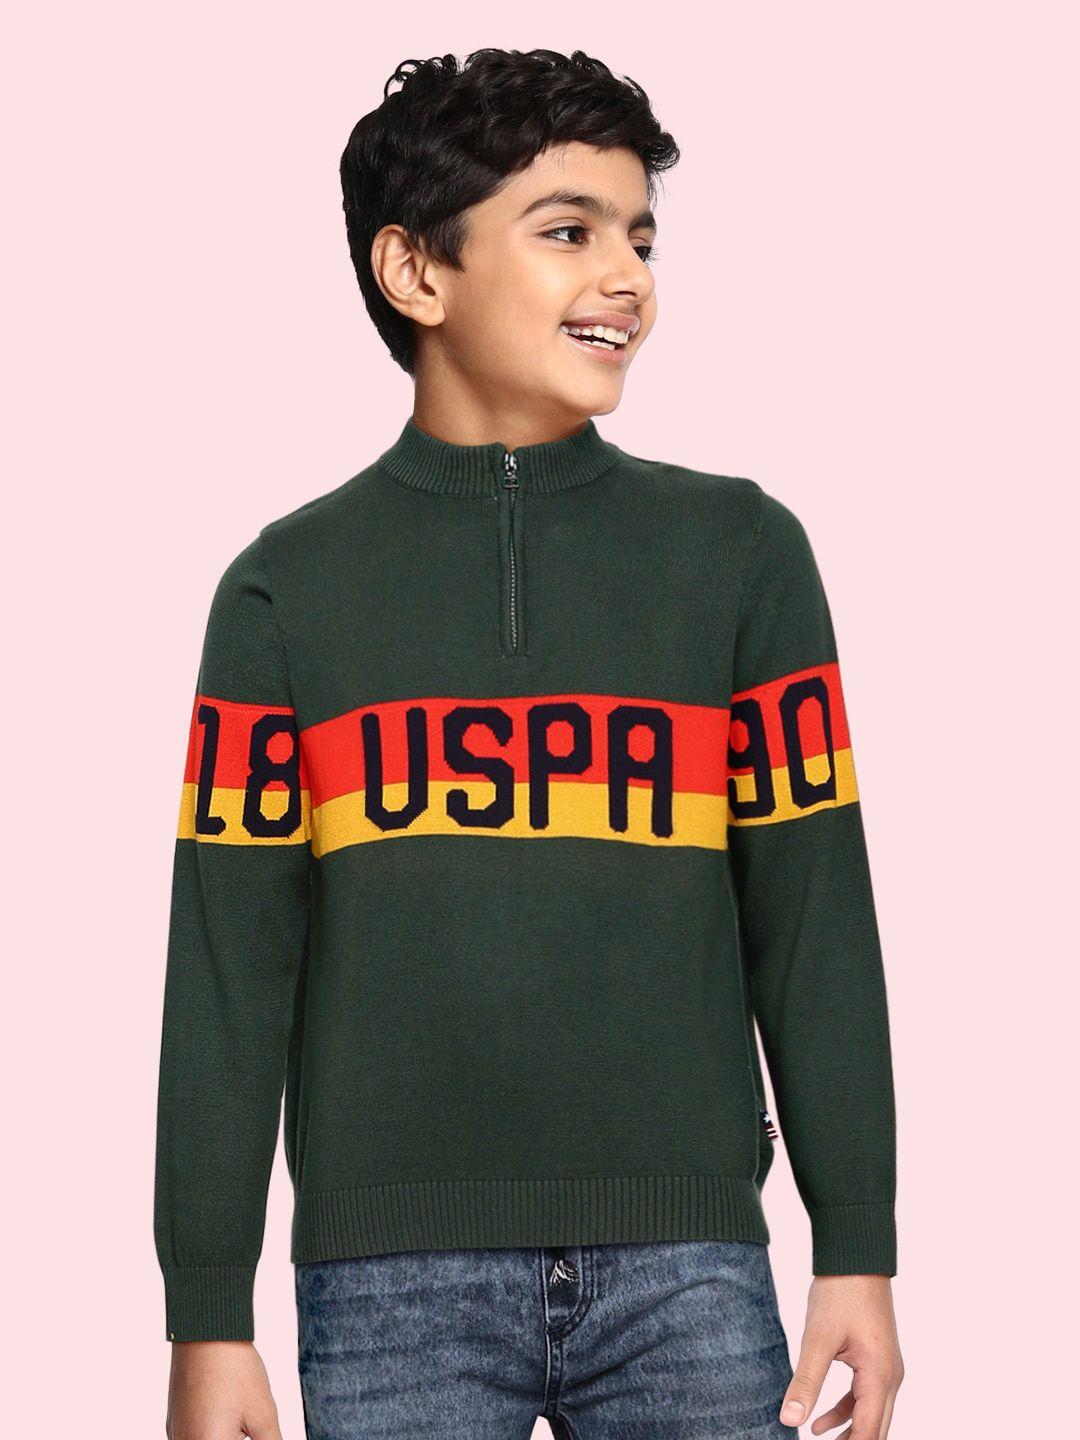 u.s. polo assn. kids boys olive green embroidered pure cotton sweater